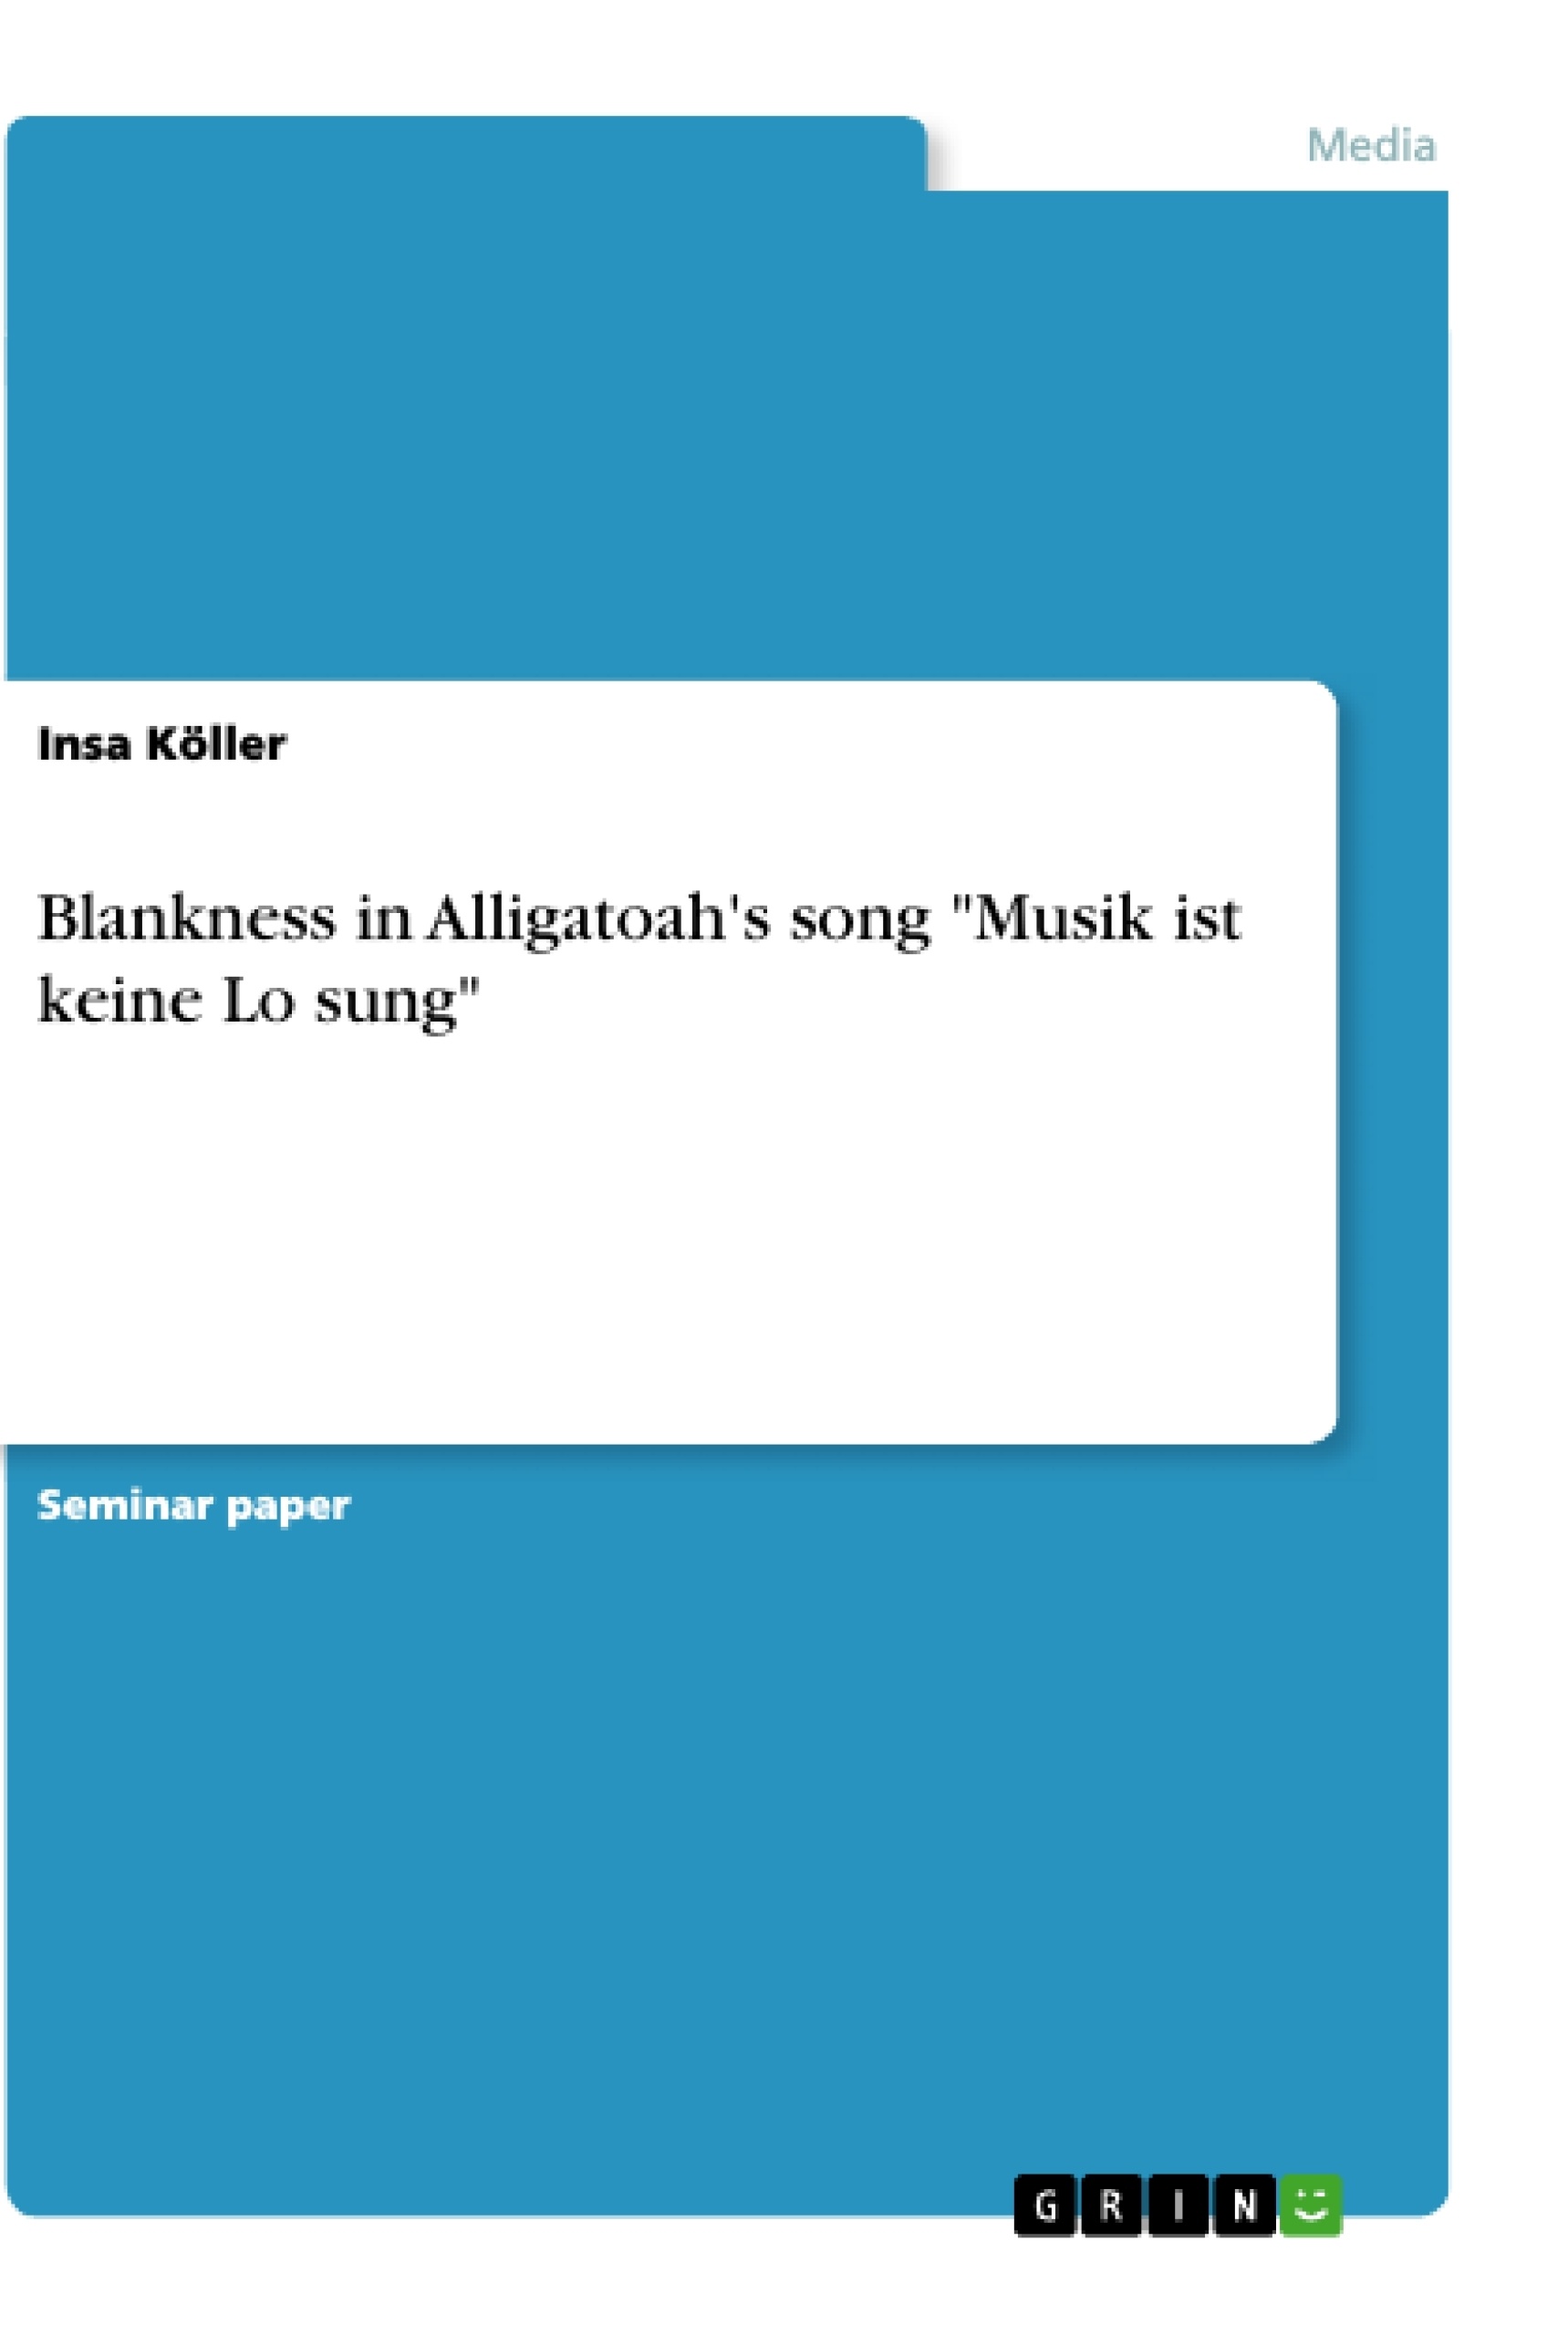 Title: Blankness in Alligatoah's song "Musik ist keine Lösung"